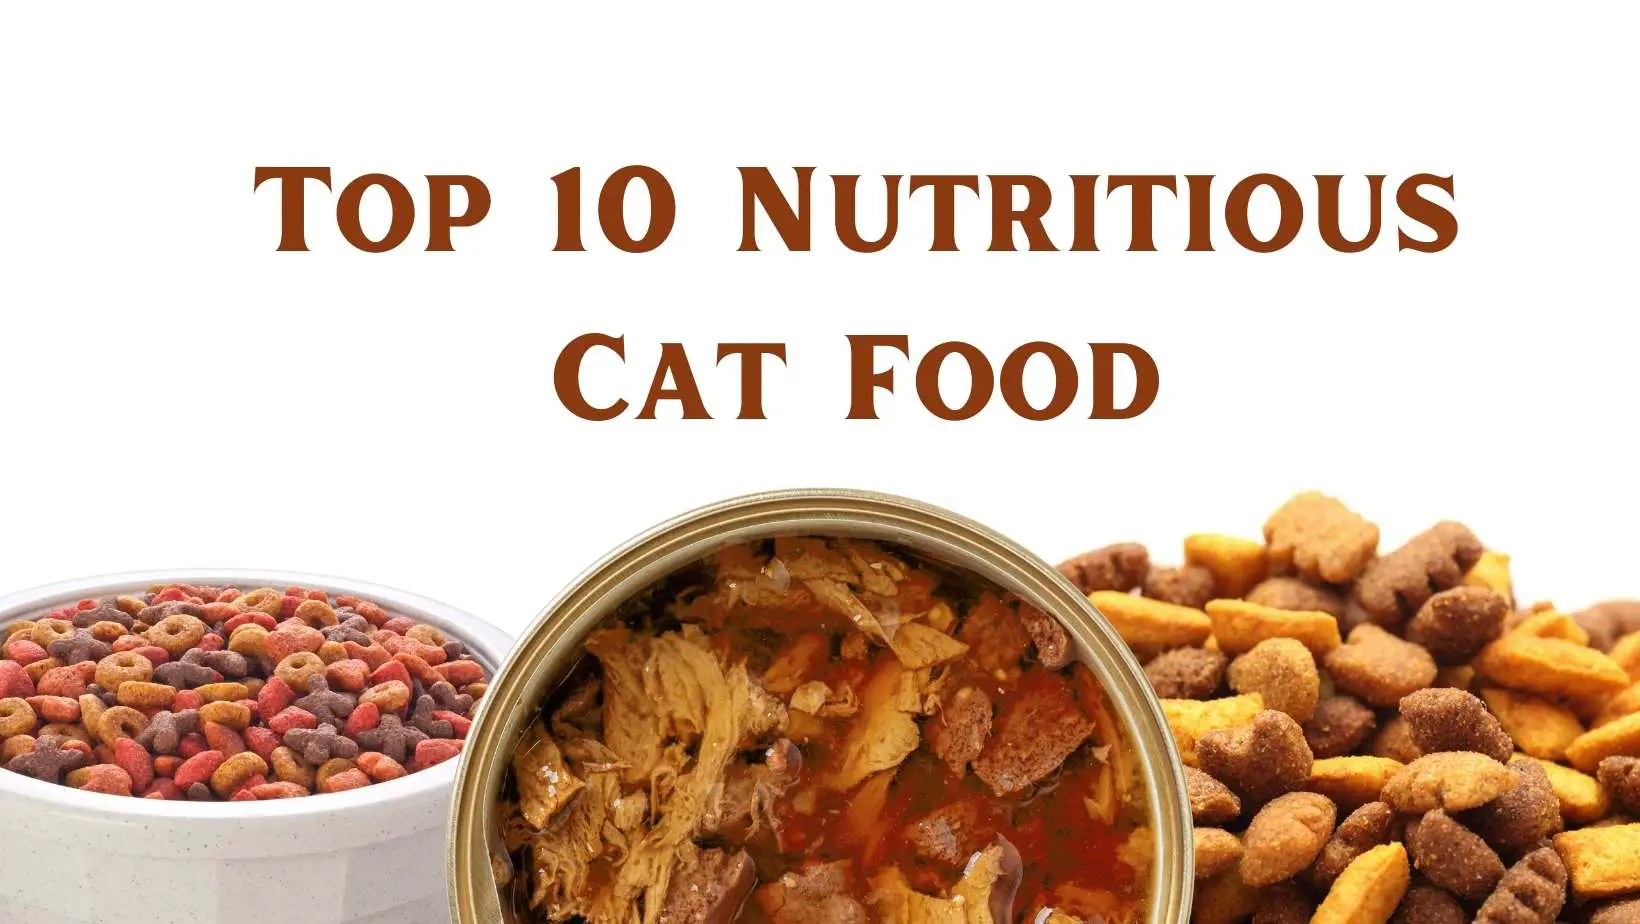 Top 10 Nutritious Cat Food